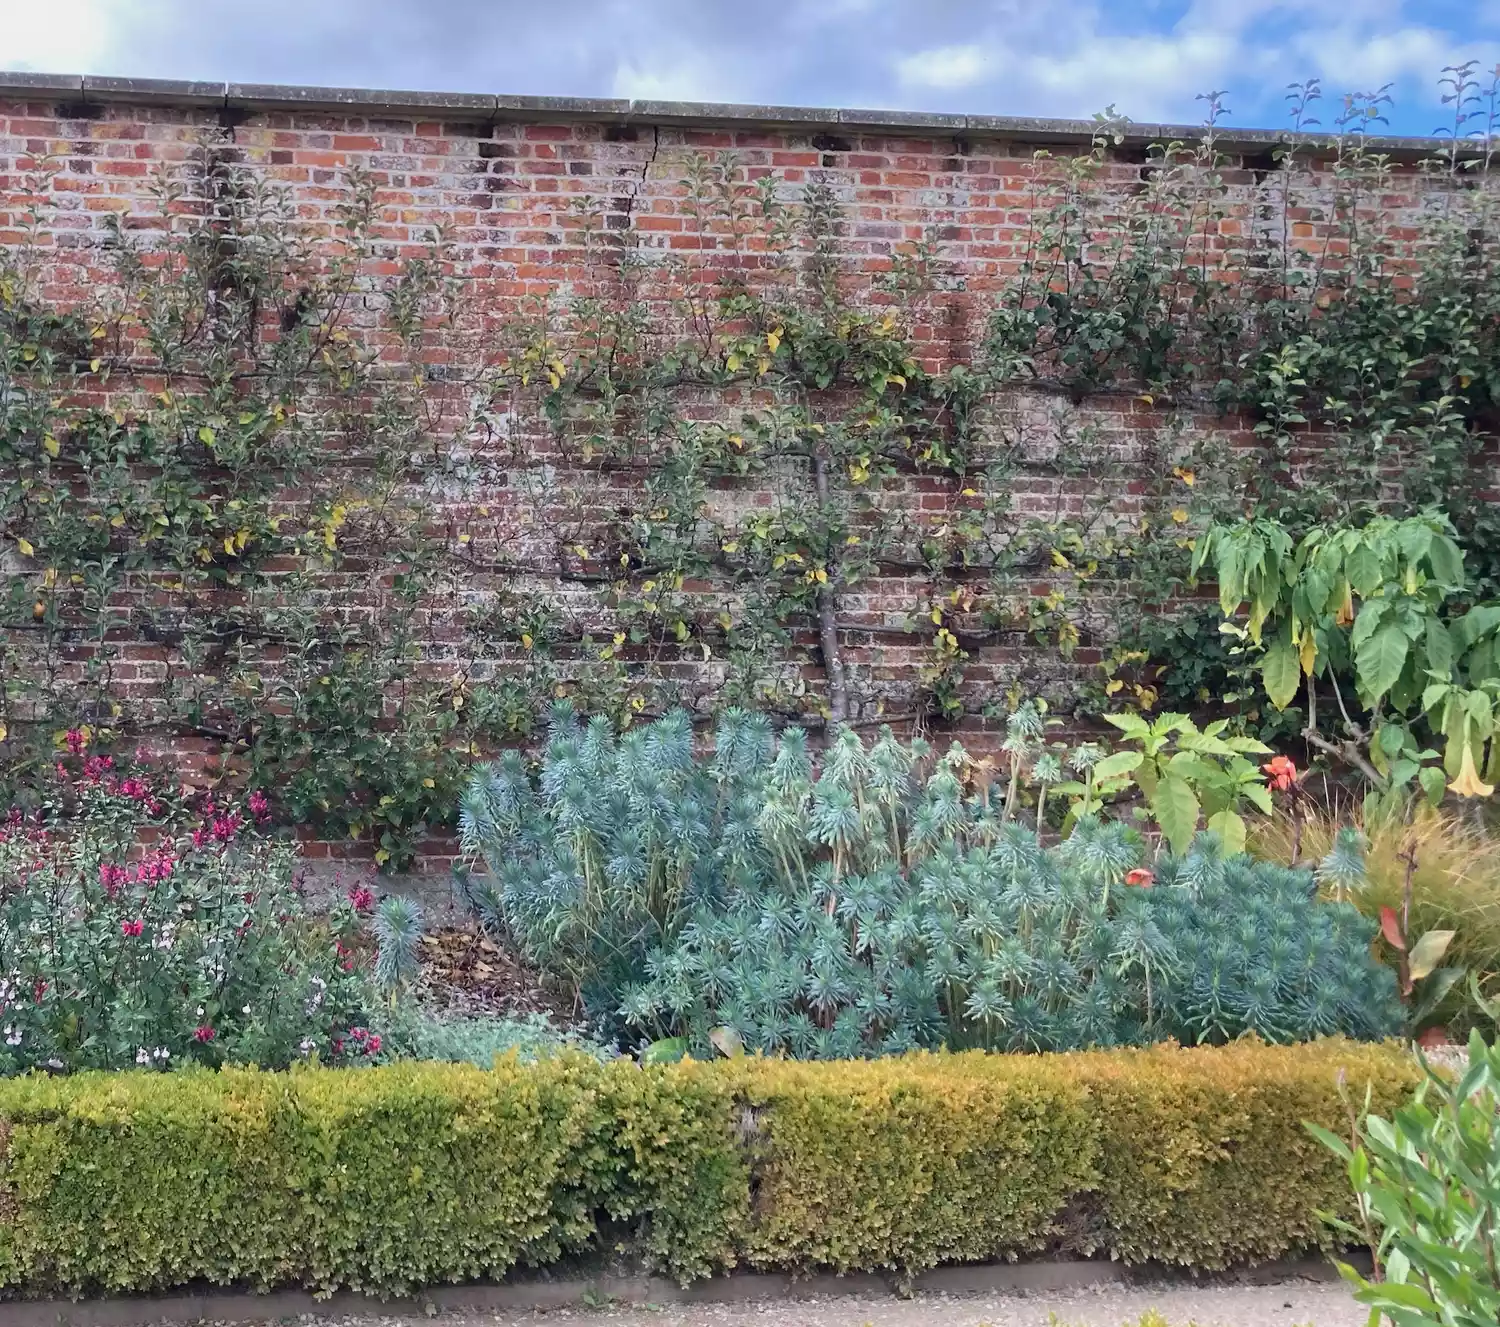 English walled garden wiuth espaliered fruit trees on brick wall, perennials and short boxwood hedge in front